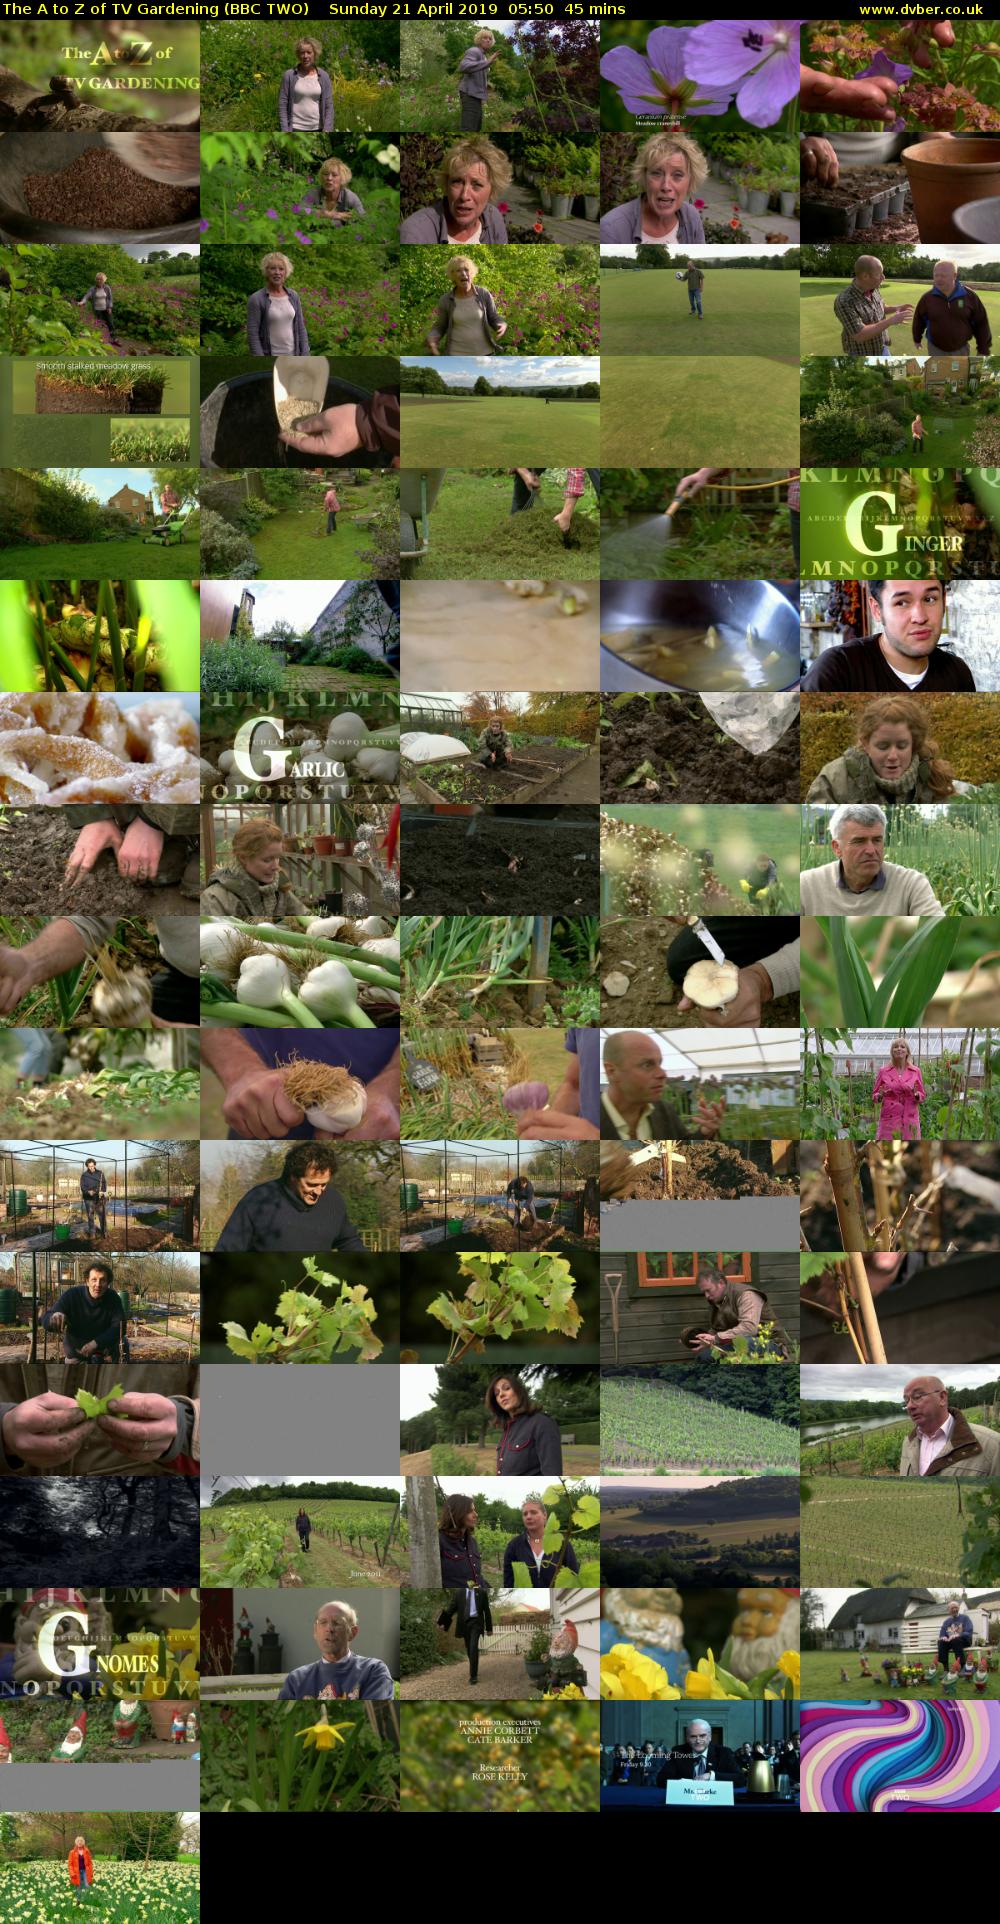 The A to Z of TV Gardening (BBC TWO) Sunday 21 April 2019 05:50 - 06:35